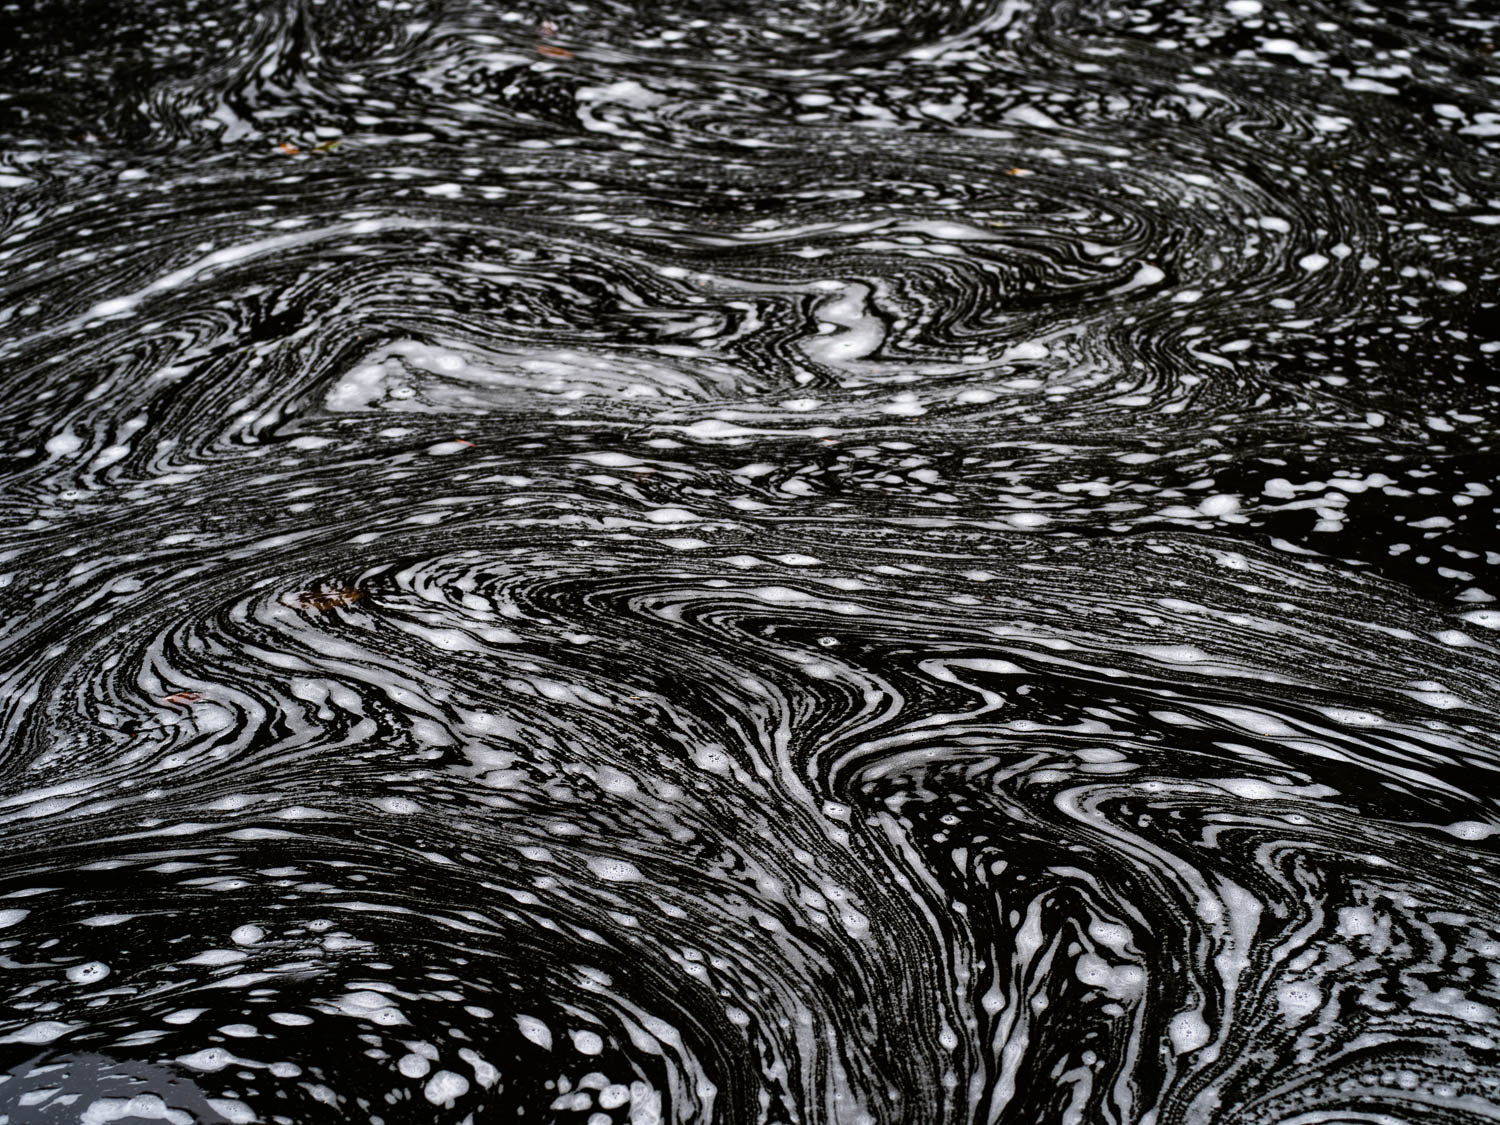 A thumbprint-like texture of white cotton, Foam on Black Water, Far North Queensland